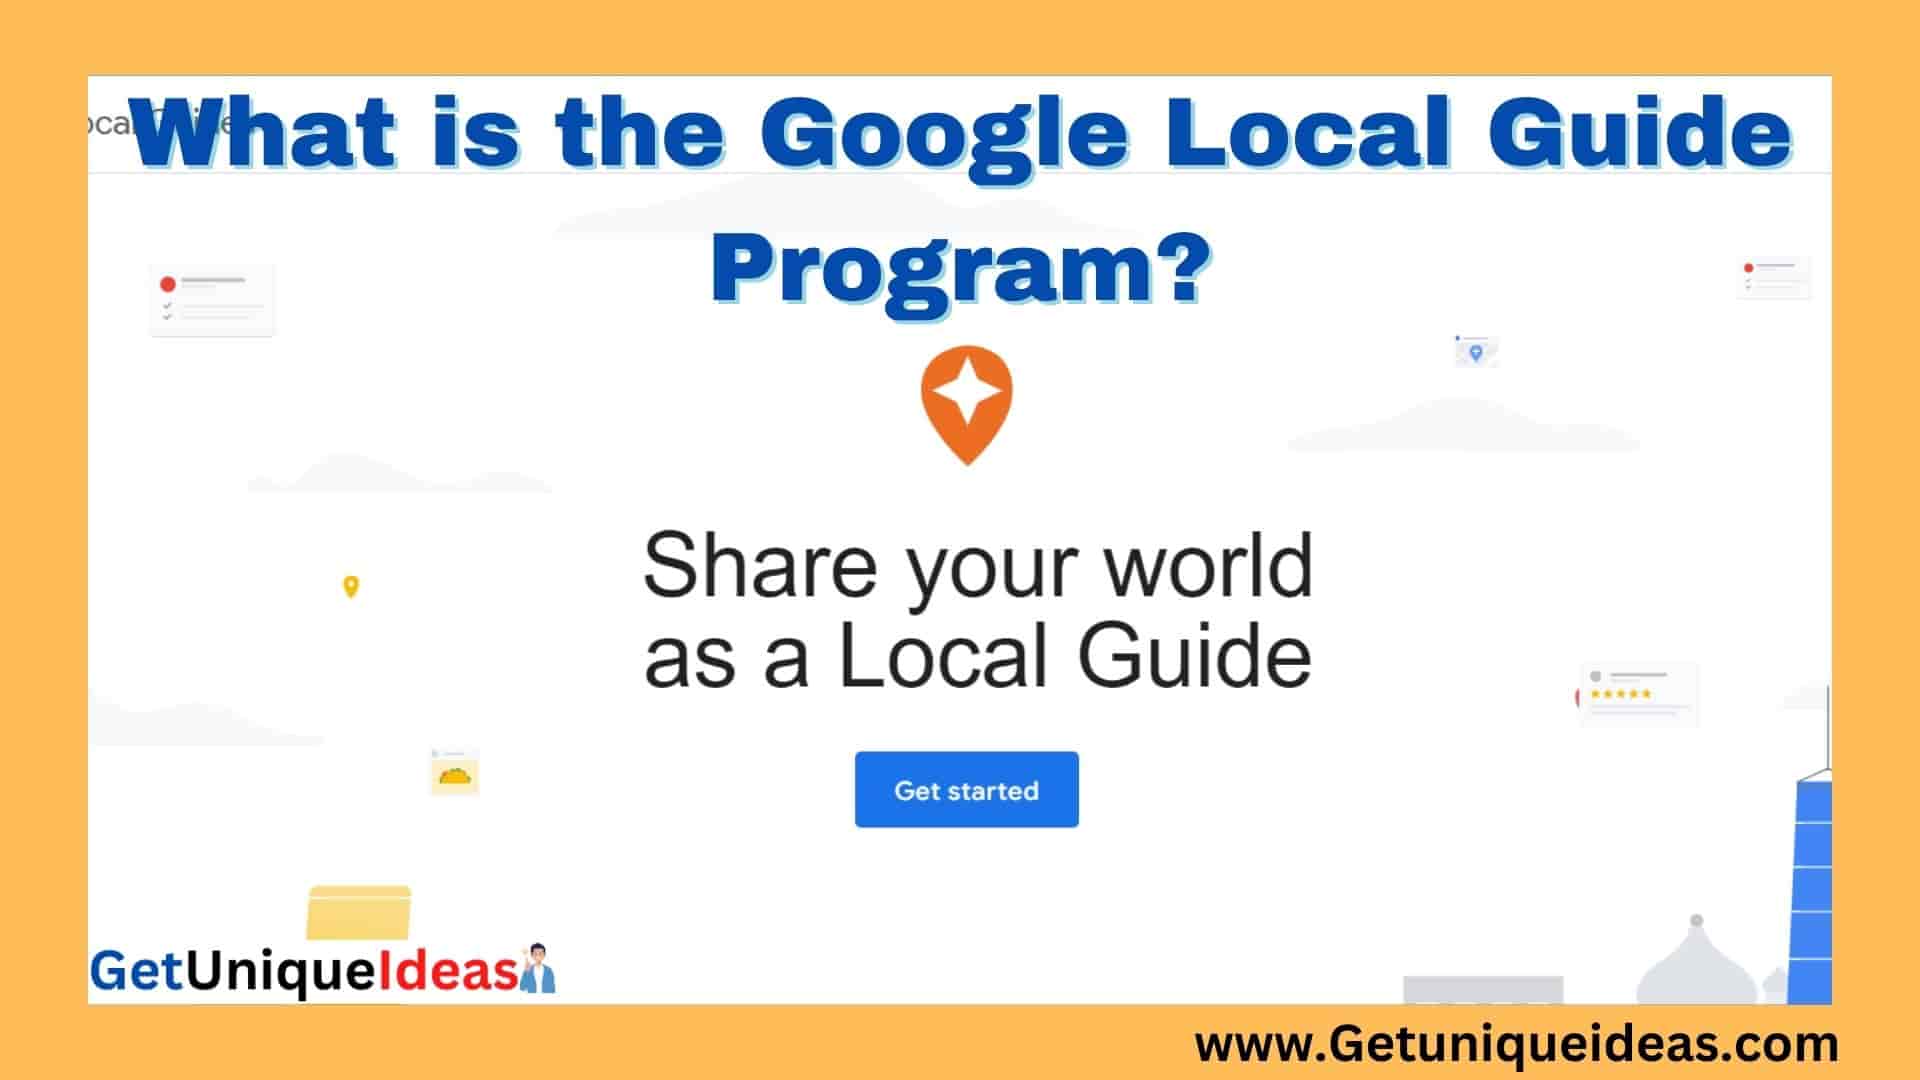 What is the Google Local Guide Program?